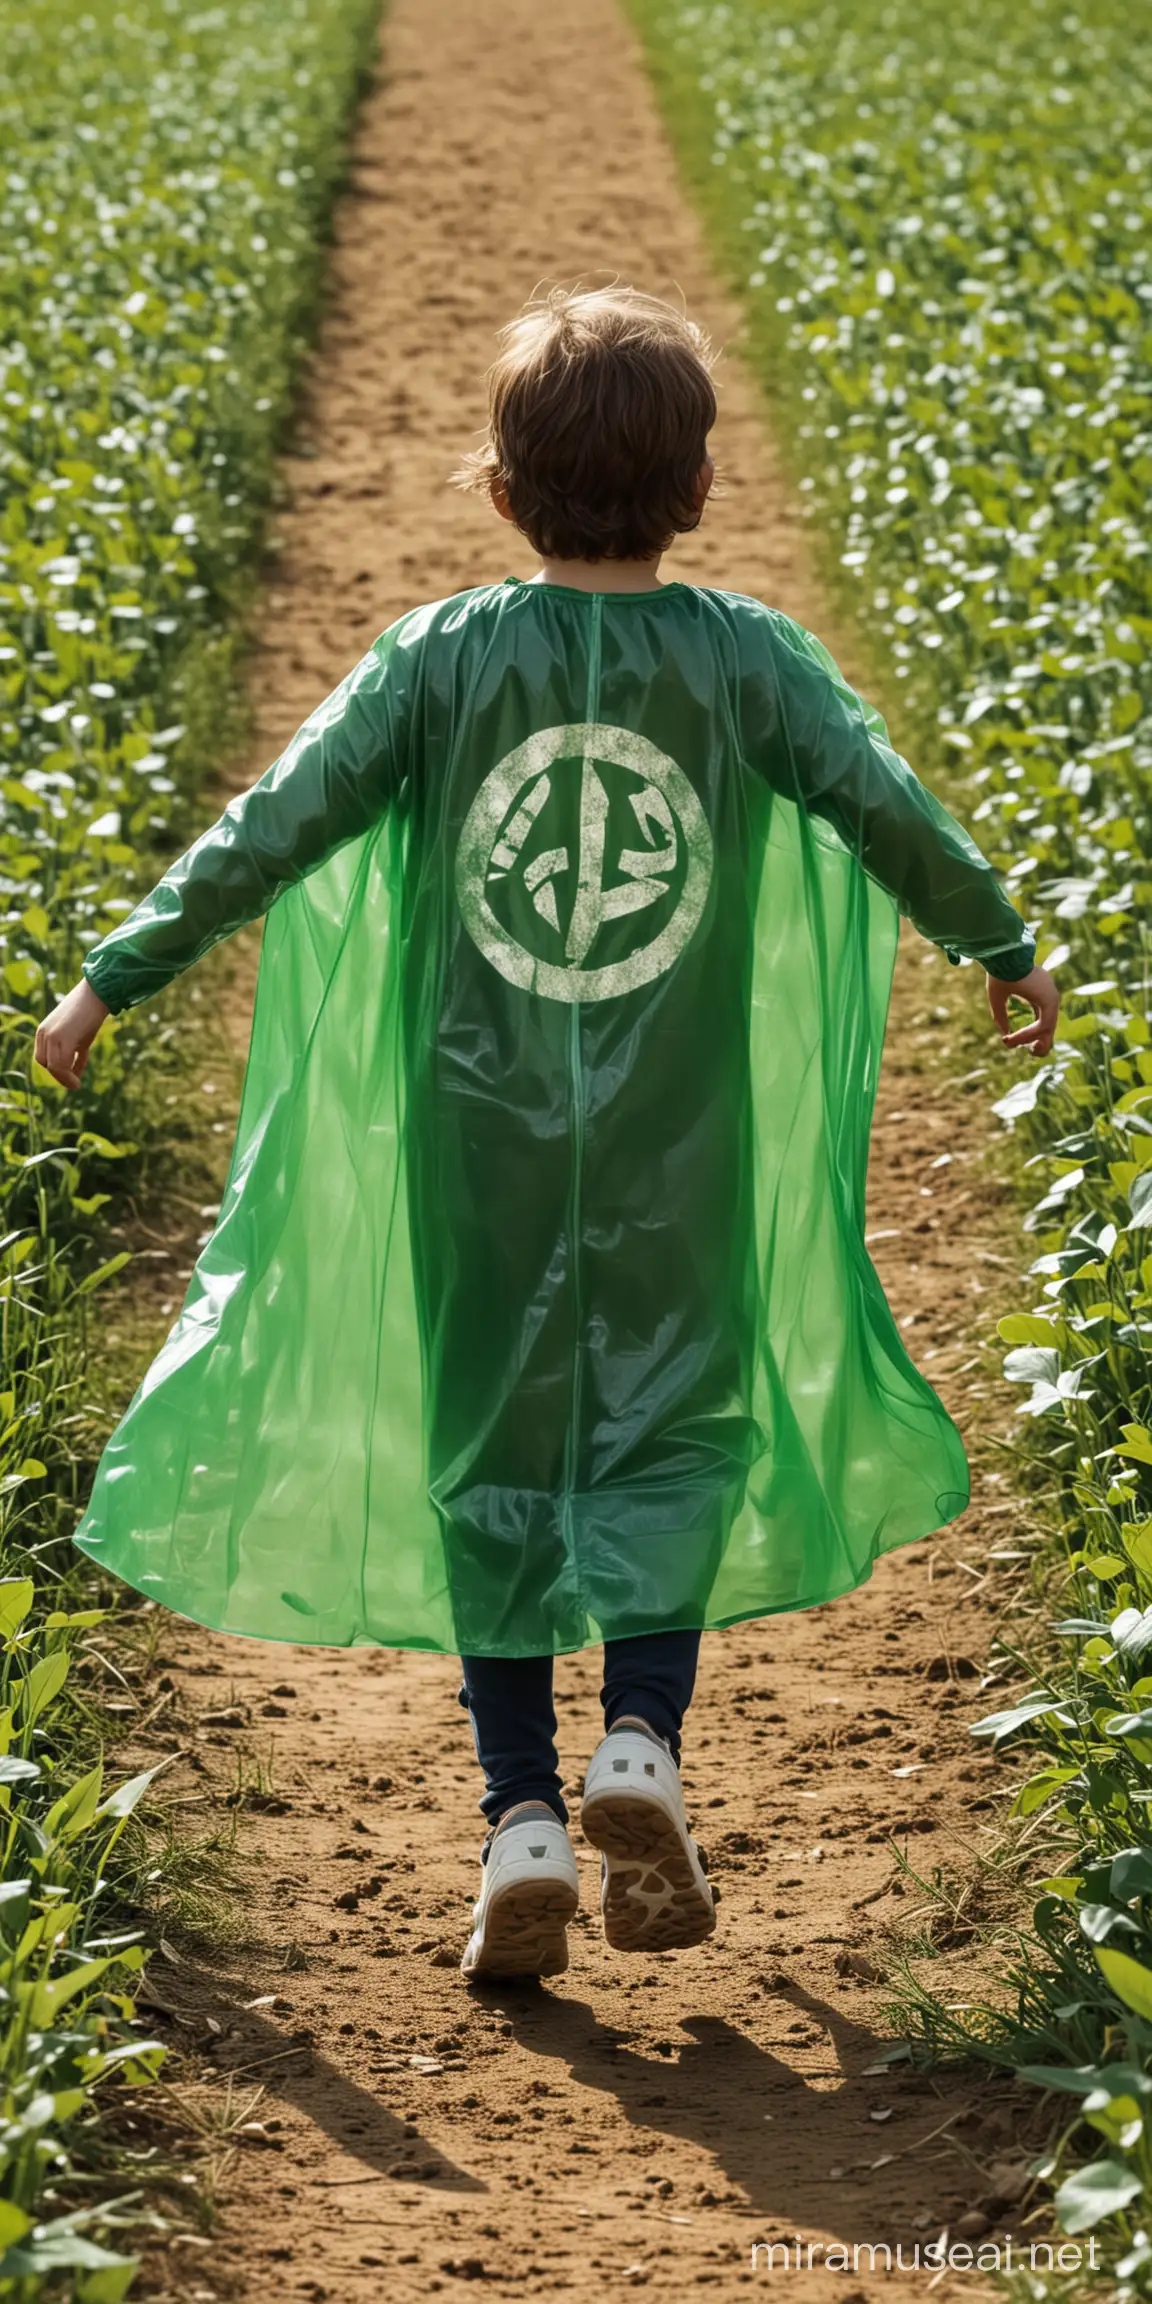 child running in a field with a green plastic cape with leaf details and recycled symbol